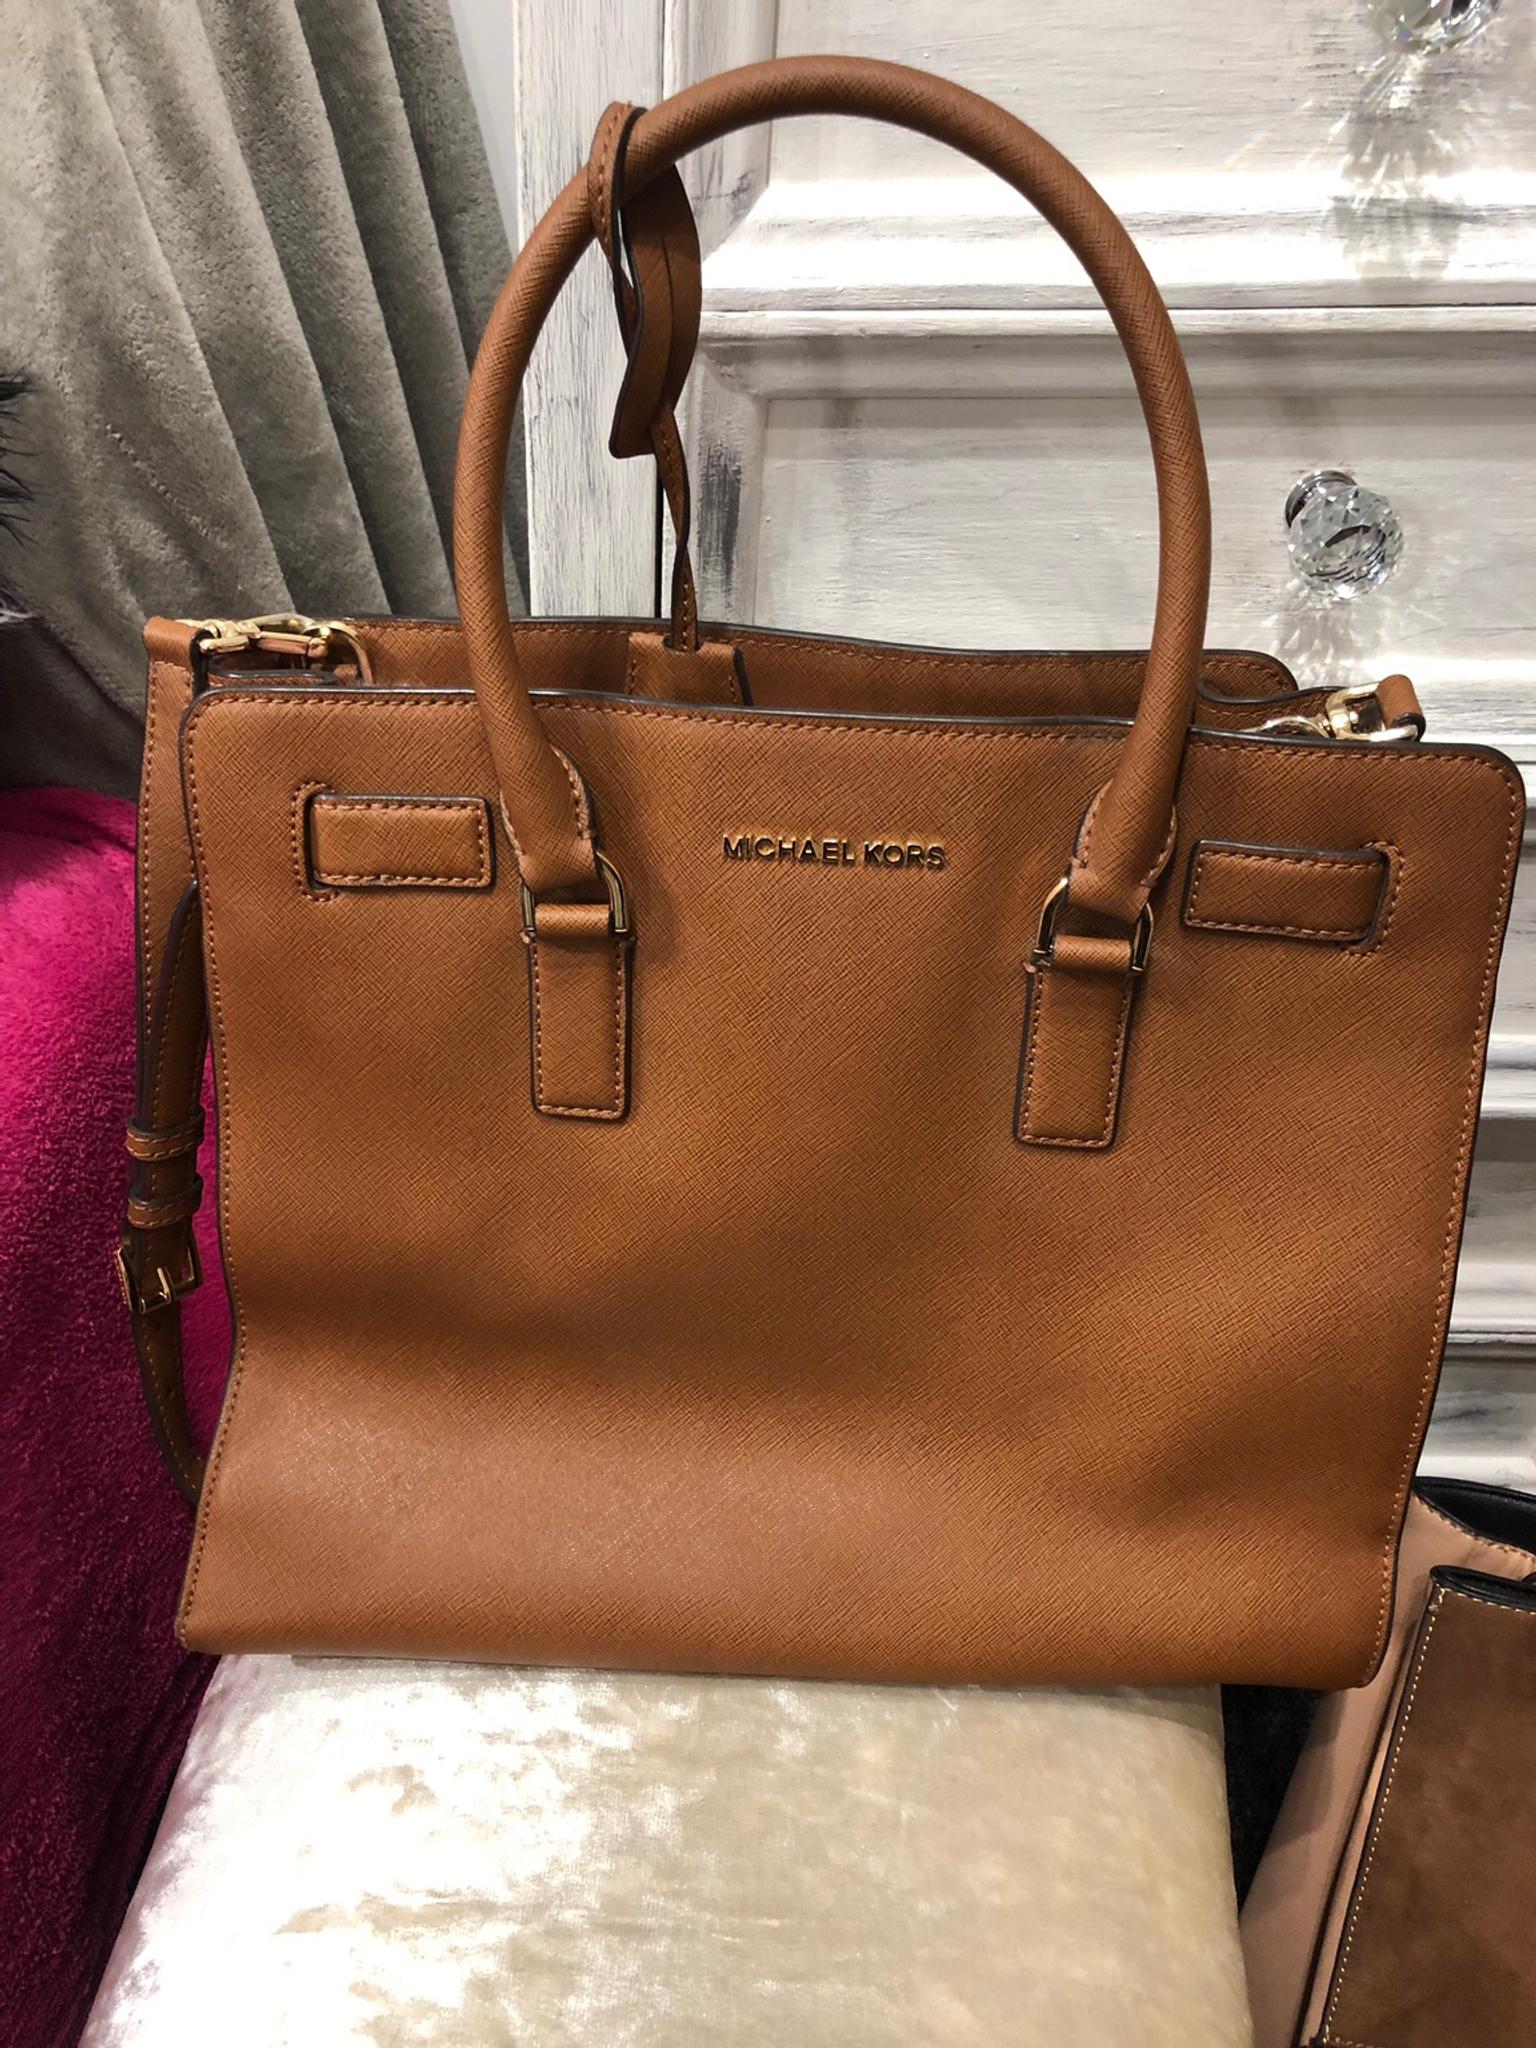 are michael kors bags genuine leather